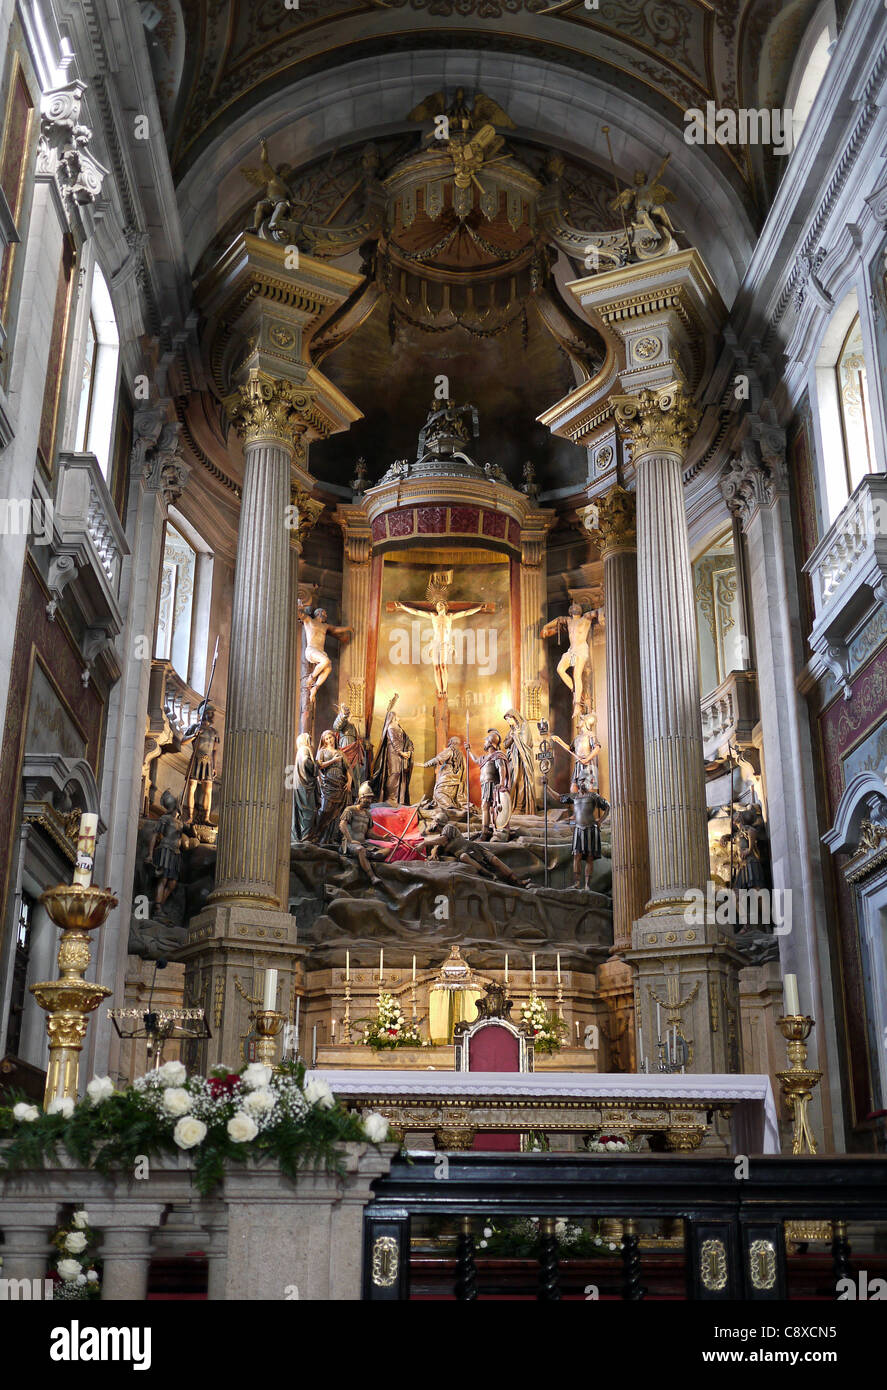 The altar of the main church (igreja) at Bom Jesus do Monte, near Braga, Portugal with a 3-D diorama of the crucifixion. Stock Photo